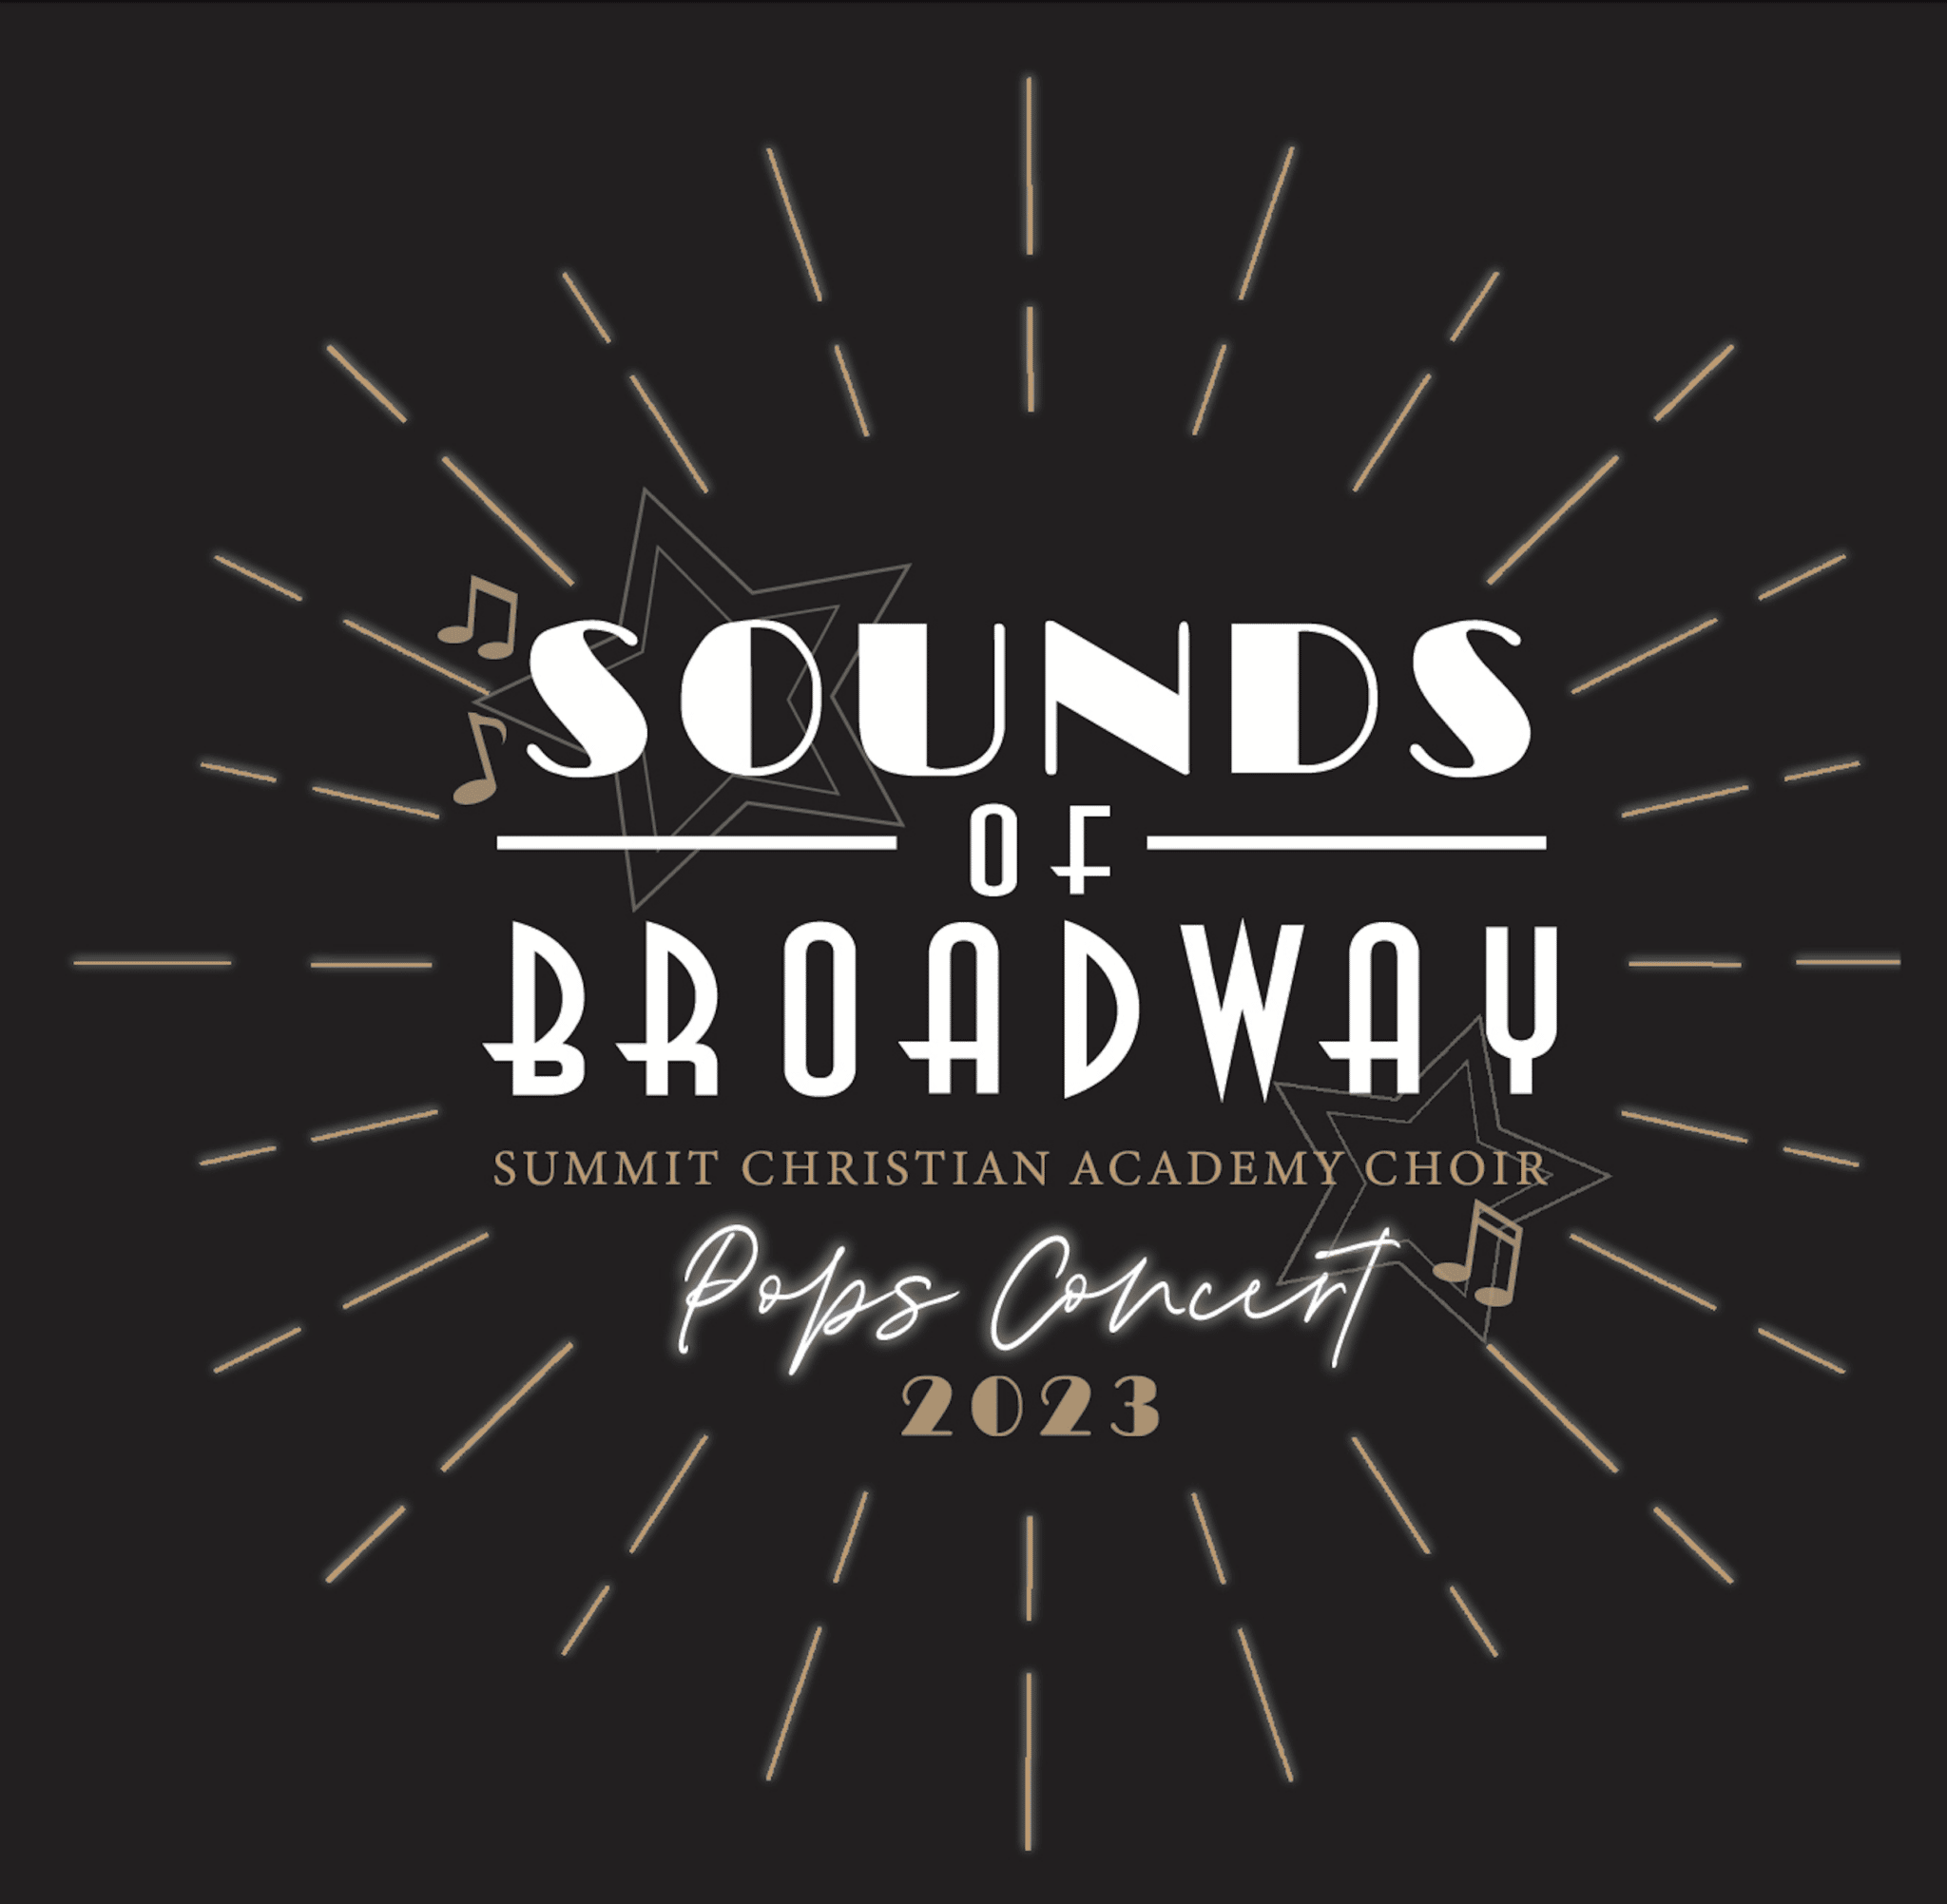 Summit Christian Academy (SCA) will be hosting a fundraising dinner and choral concert called, Sounds of Broadway, on Thursday, February 13 in the SCA Secondary Gymnasium.